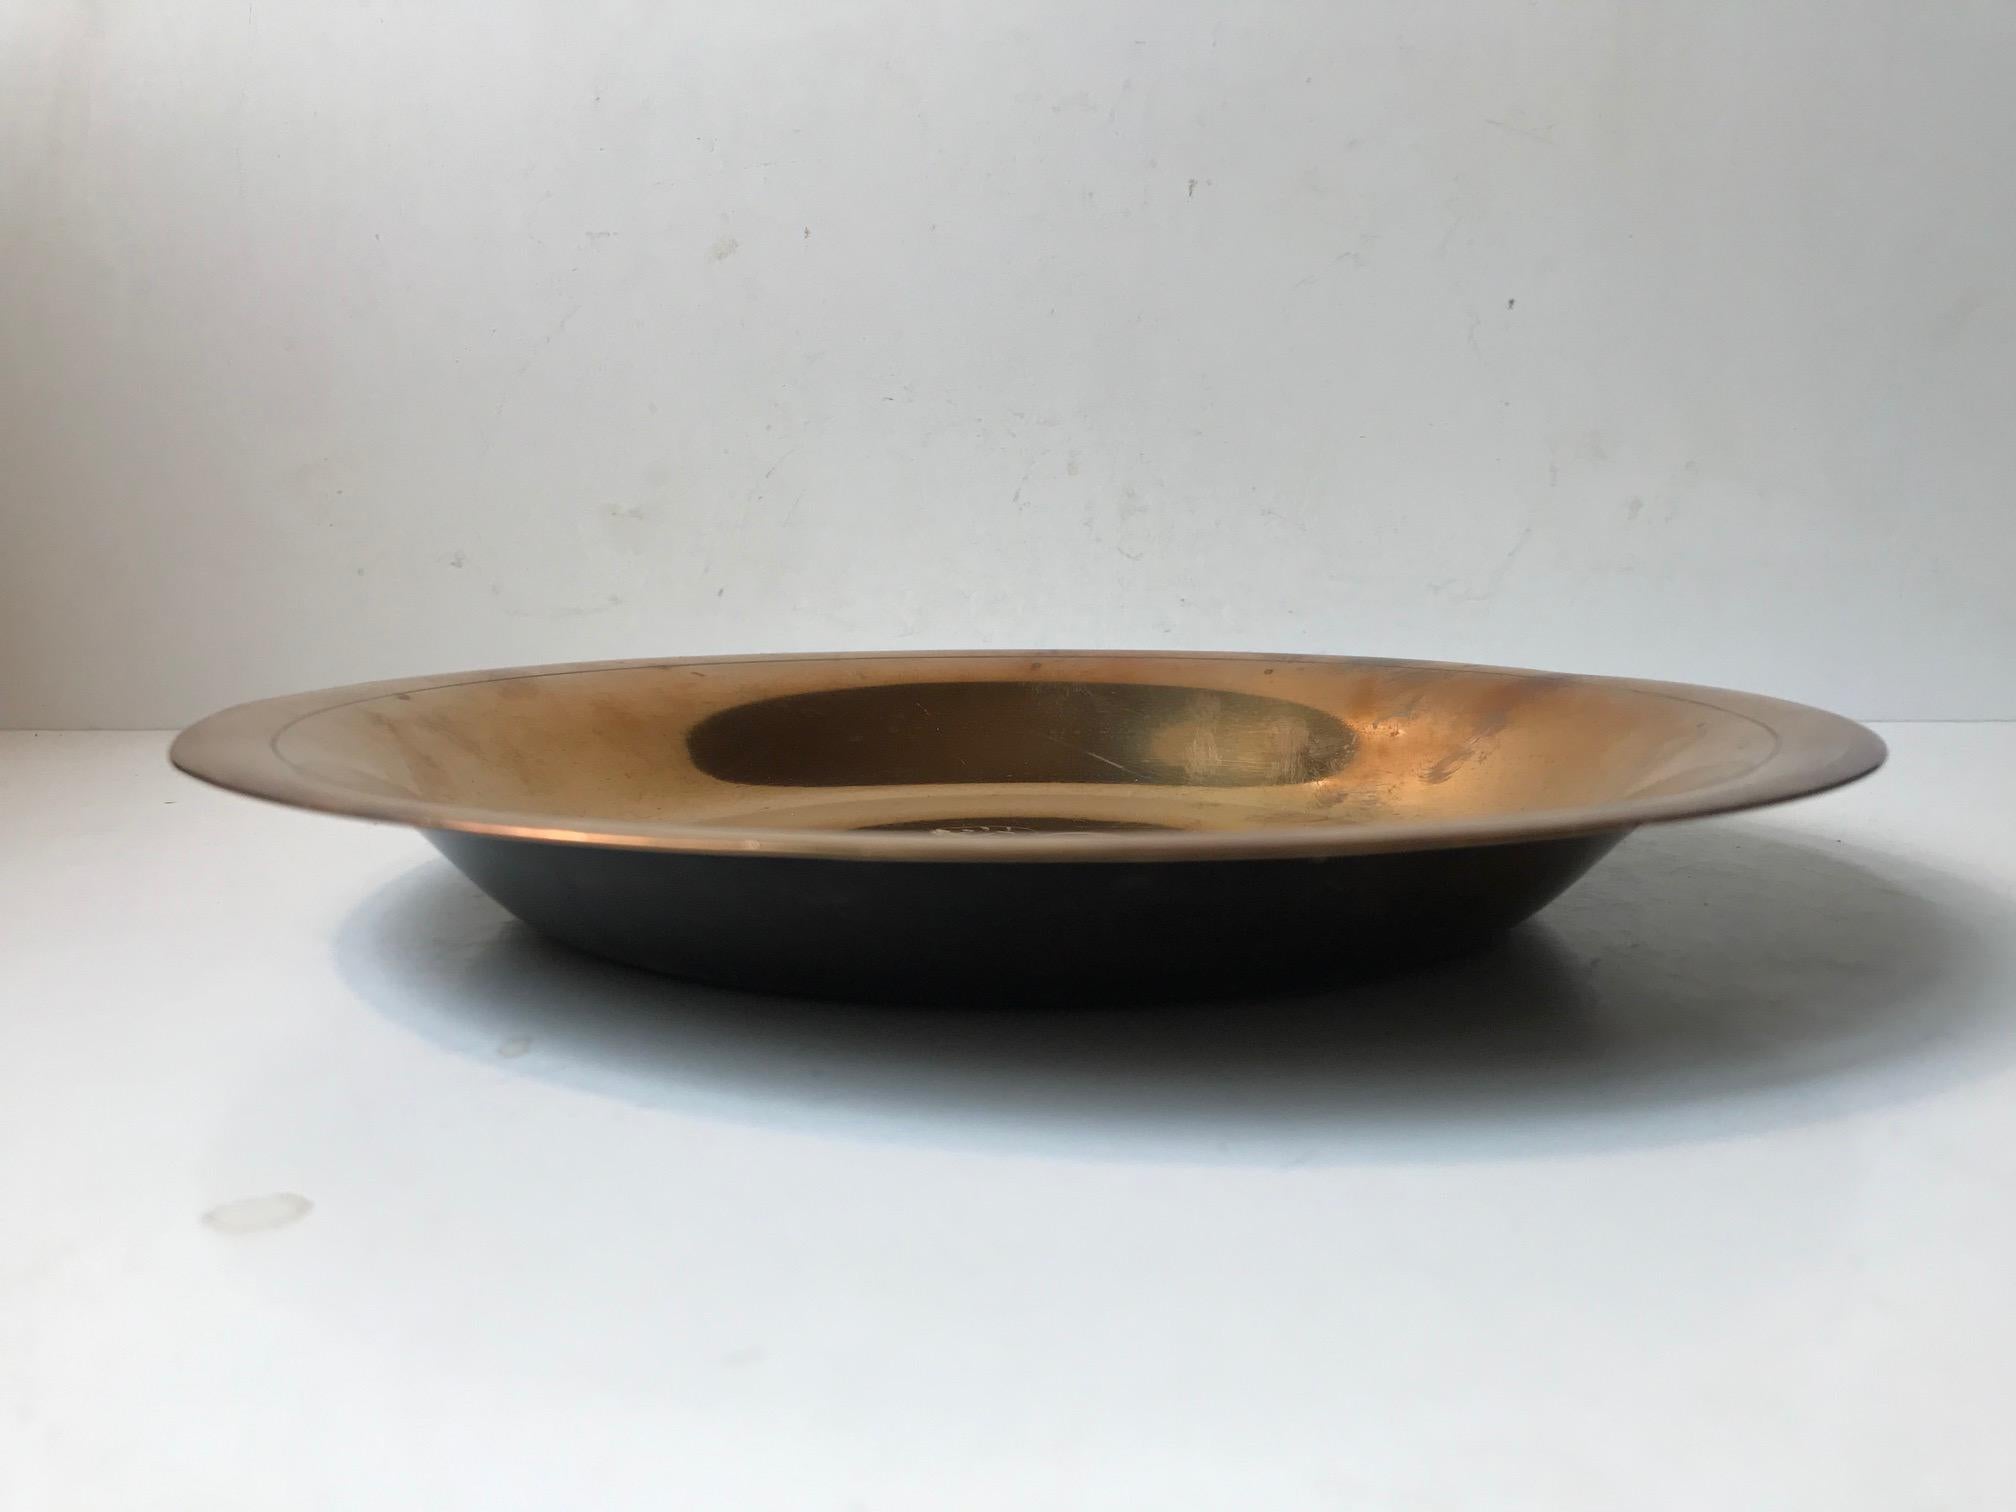 European Art Deco Bronze Dish With Grapes by Ægte Ildfast, 1930s For Sale